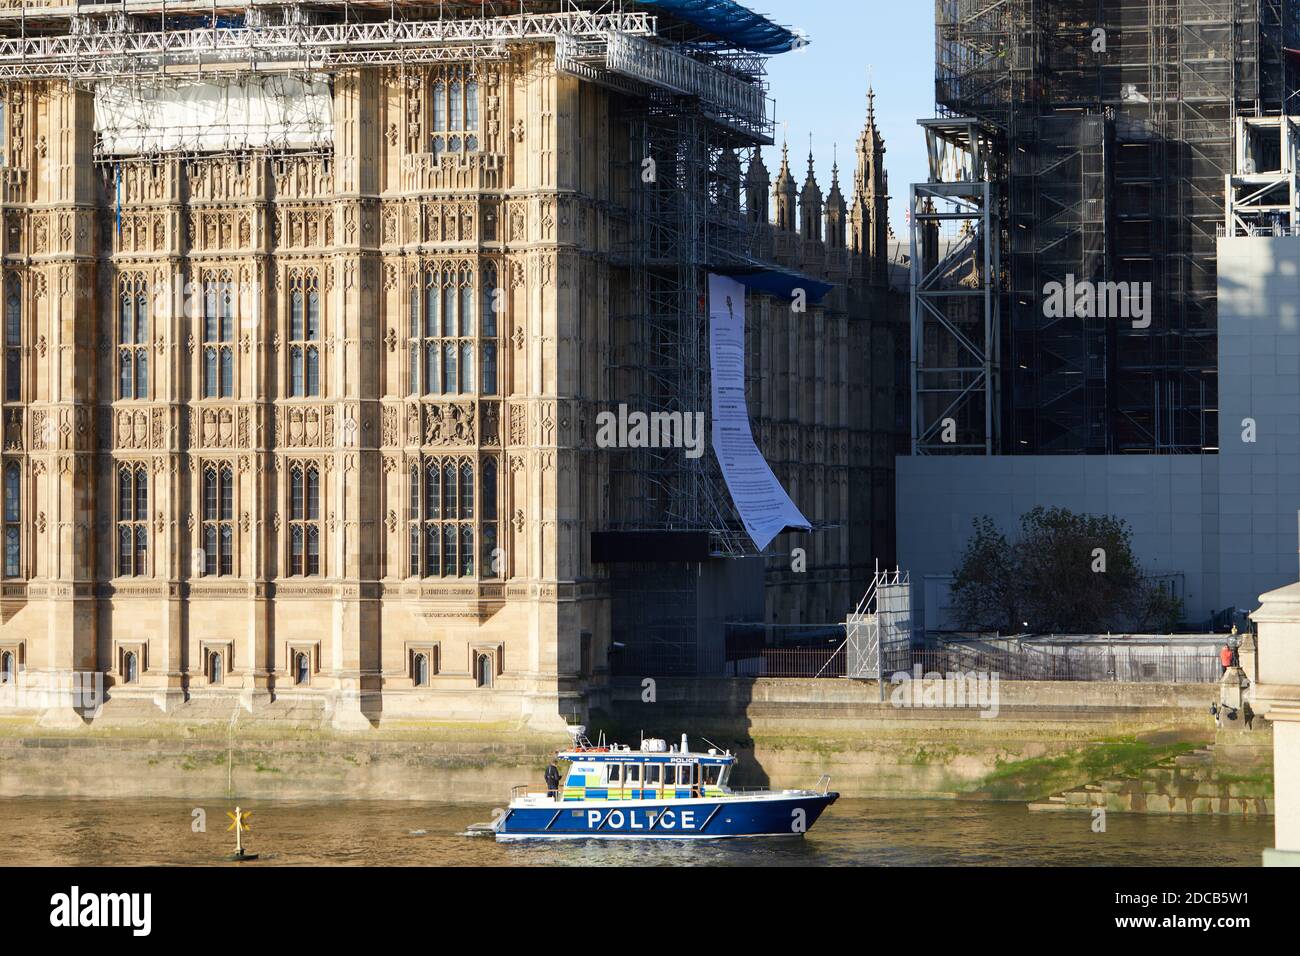 London, UK. - 12 Nov 2020: Police surround demonstrators from the protest group Africans Rising, who have unfurled a large banner on building works at the the side of the Houses of Parliament. Stock Photo